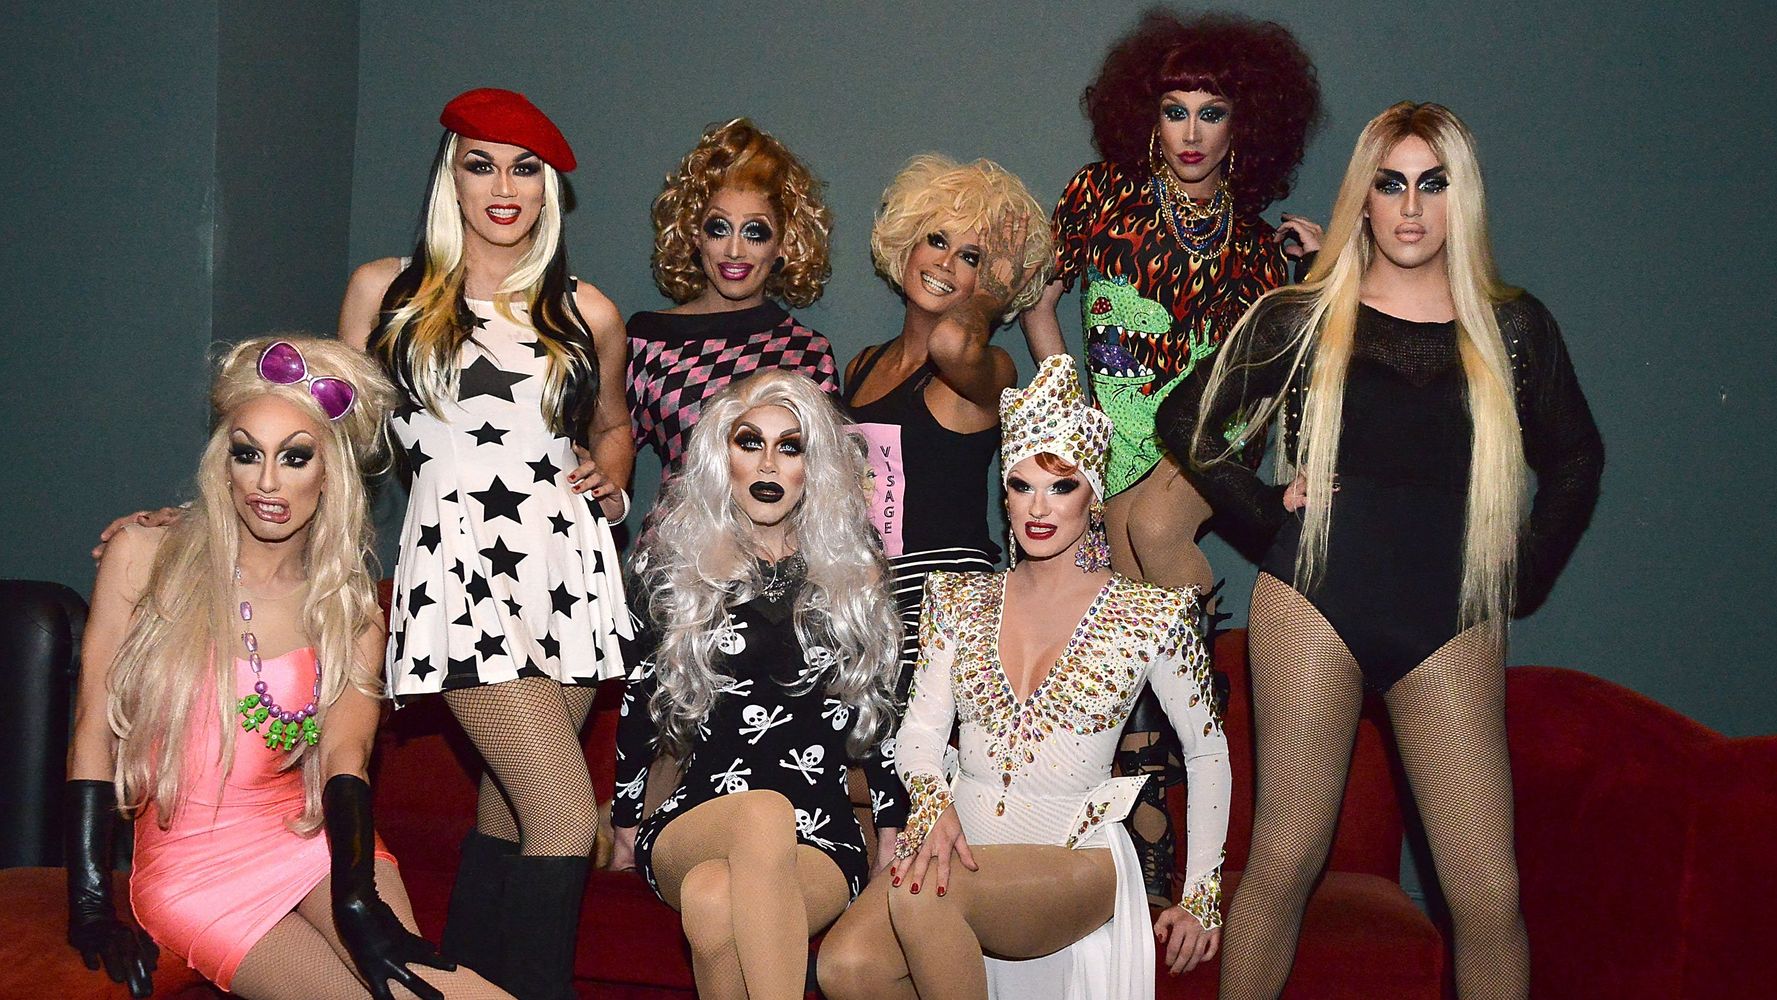 we love you, we are you, we support you and we stand with you. drag race,ru...